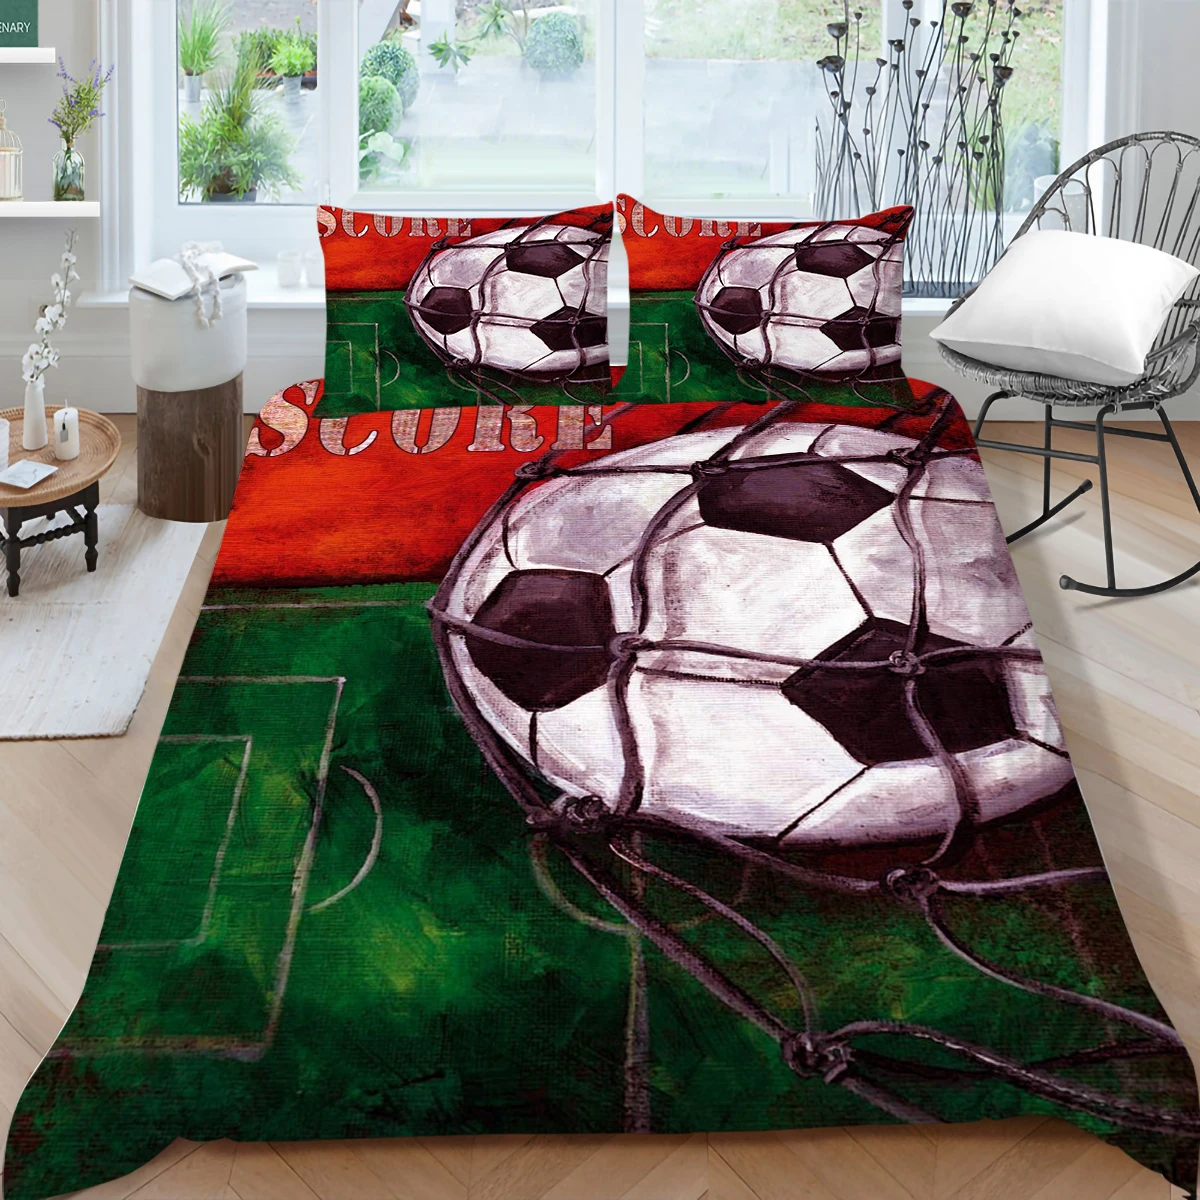 

200x200 Duvet Cover and Pillowcase Set Soccer Bedding Sets Queen Size King Full Twin Bed Set Boy's Caroon Football Comforter Set